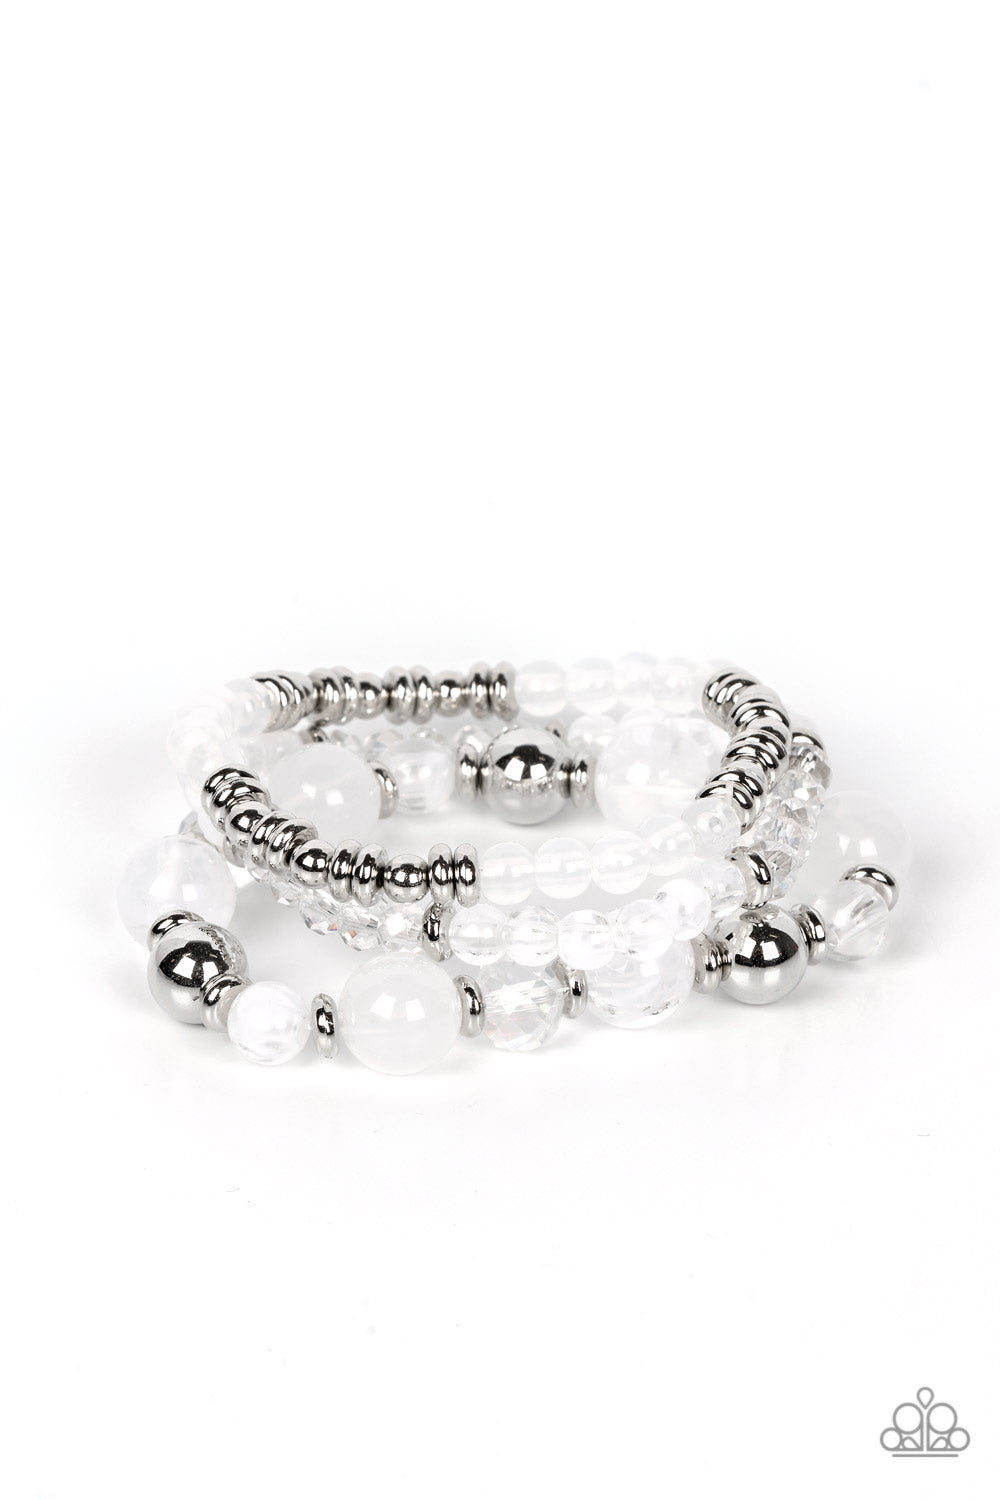 Shoreside Stroll - White and Silver Bracelets - Paparazzi Accessories - A mismatched assortment of glassy and opaque white beads joins white crystal-like and dainty silver accents along stretchy bands around the wrist, resulting in dreamy layers. Sold as one set of three bracelets.